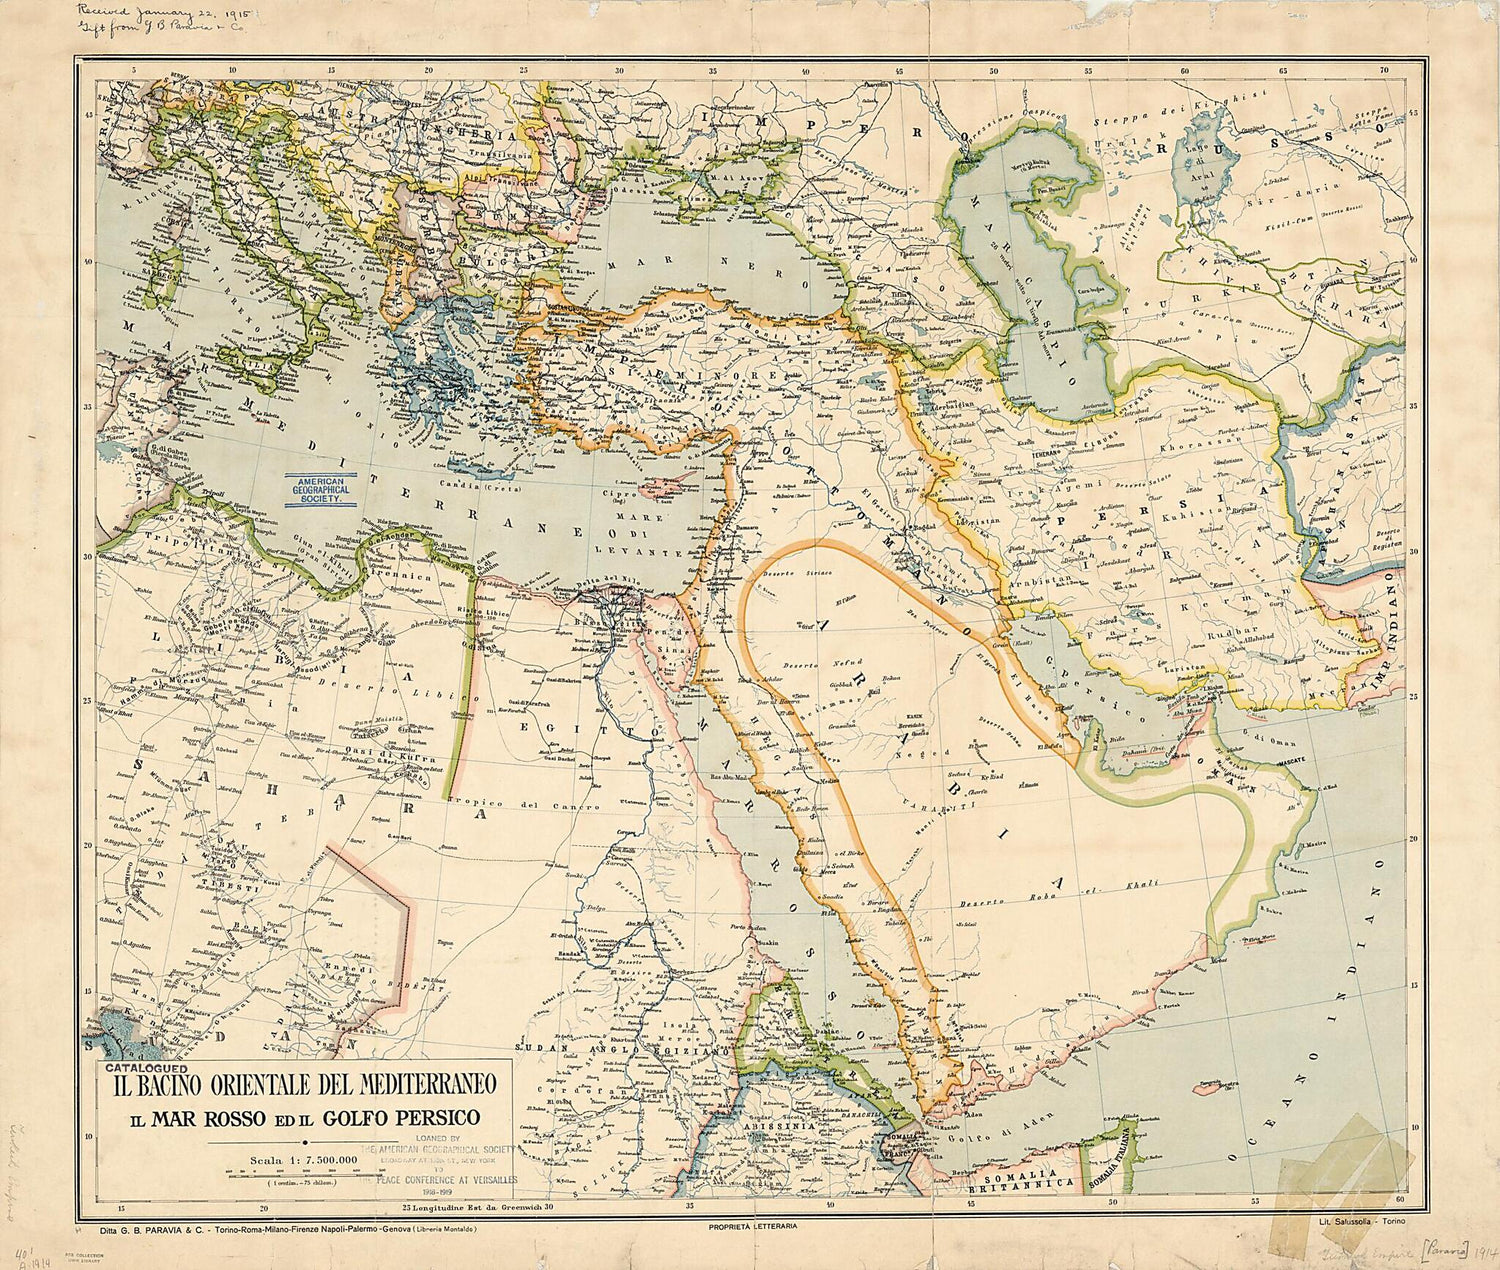 This old map of The Eastern Basin of the Mediterranean, the Red Sea, and the Persian Gulf. (Il Bacino Orientale Del Mediterraneo Il Mar Rosso Ed Il Golfo Persico) from 1890 was created by  Paravia (Firm),  Salussolia in 1890